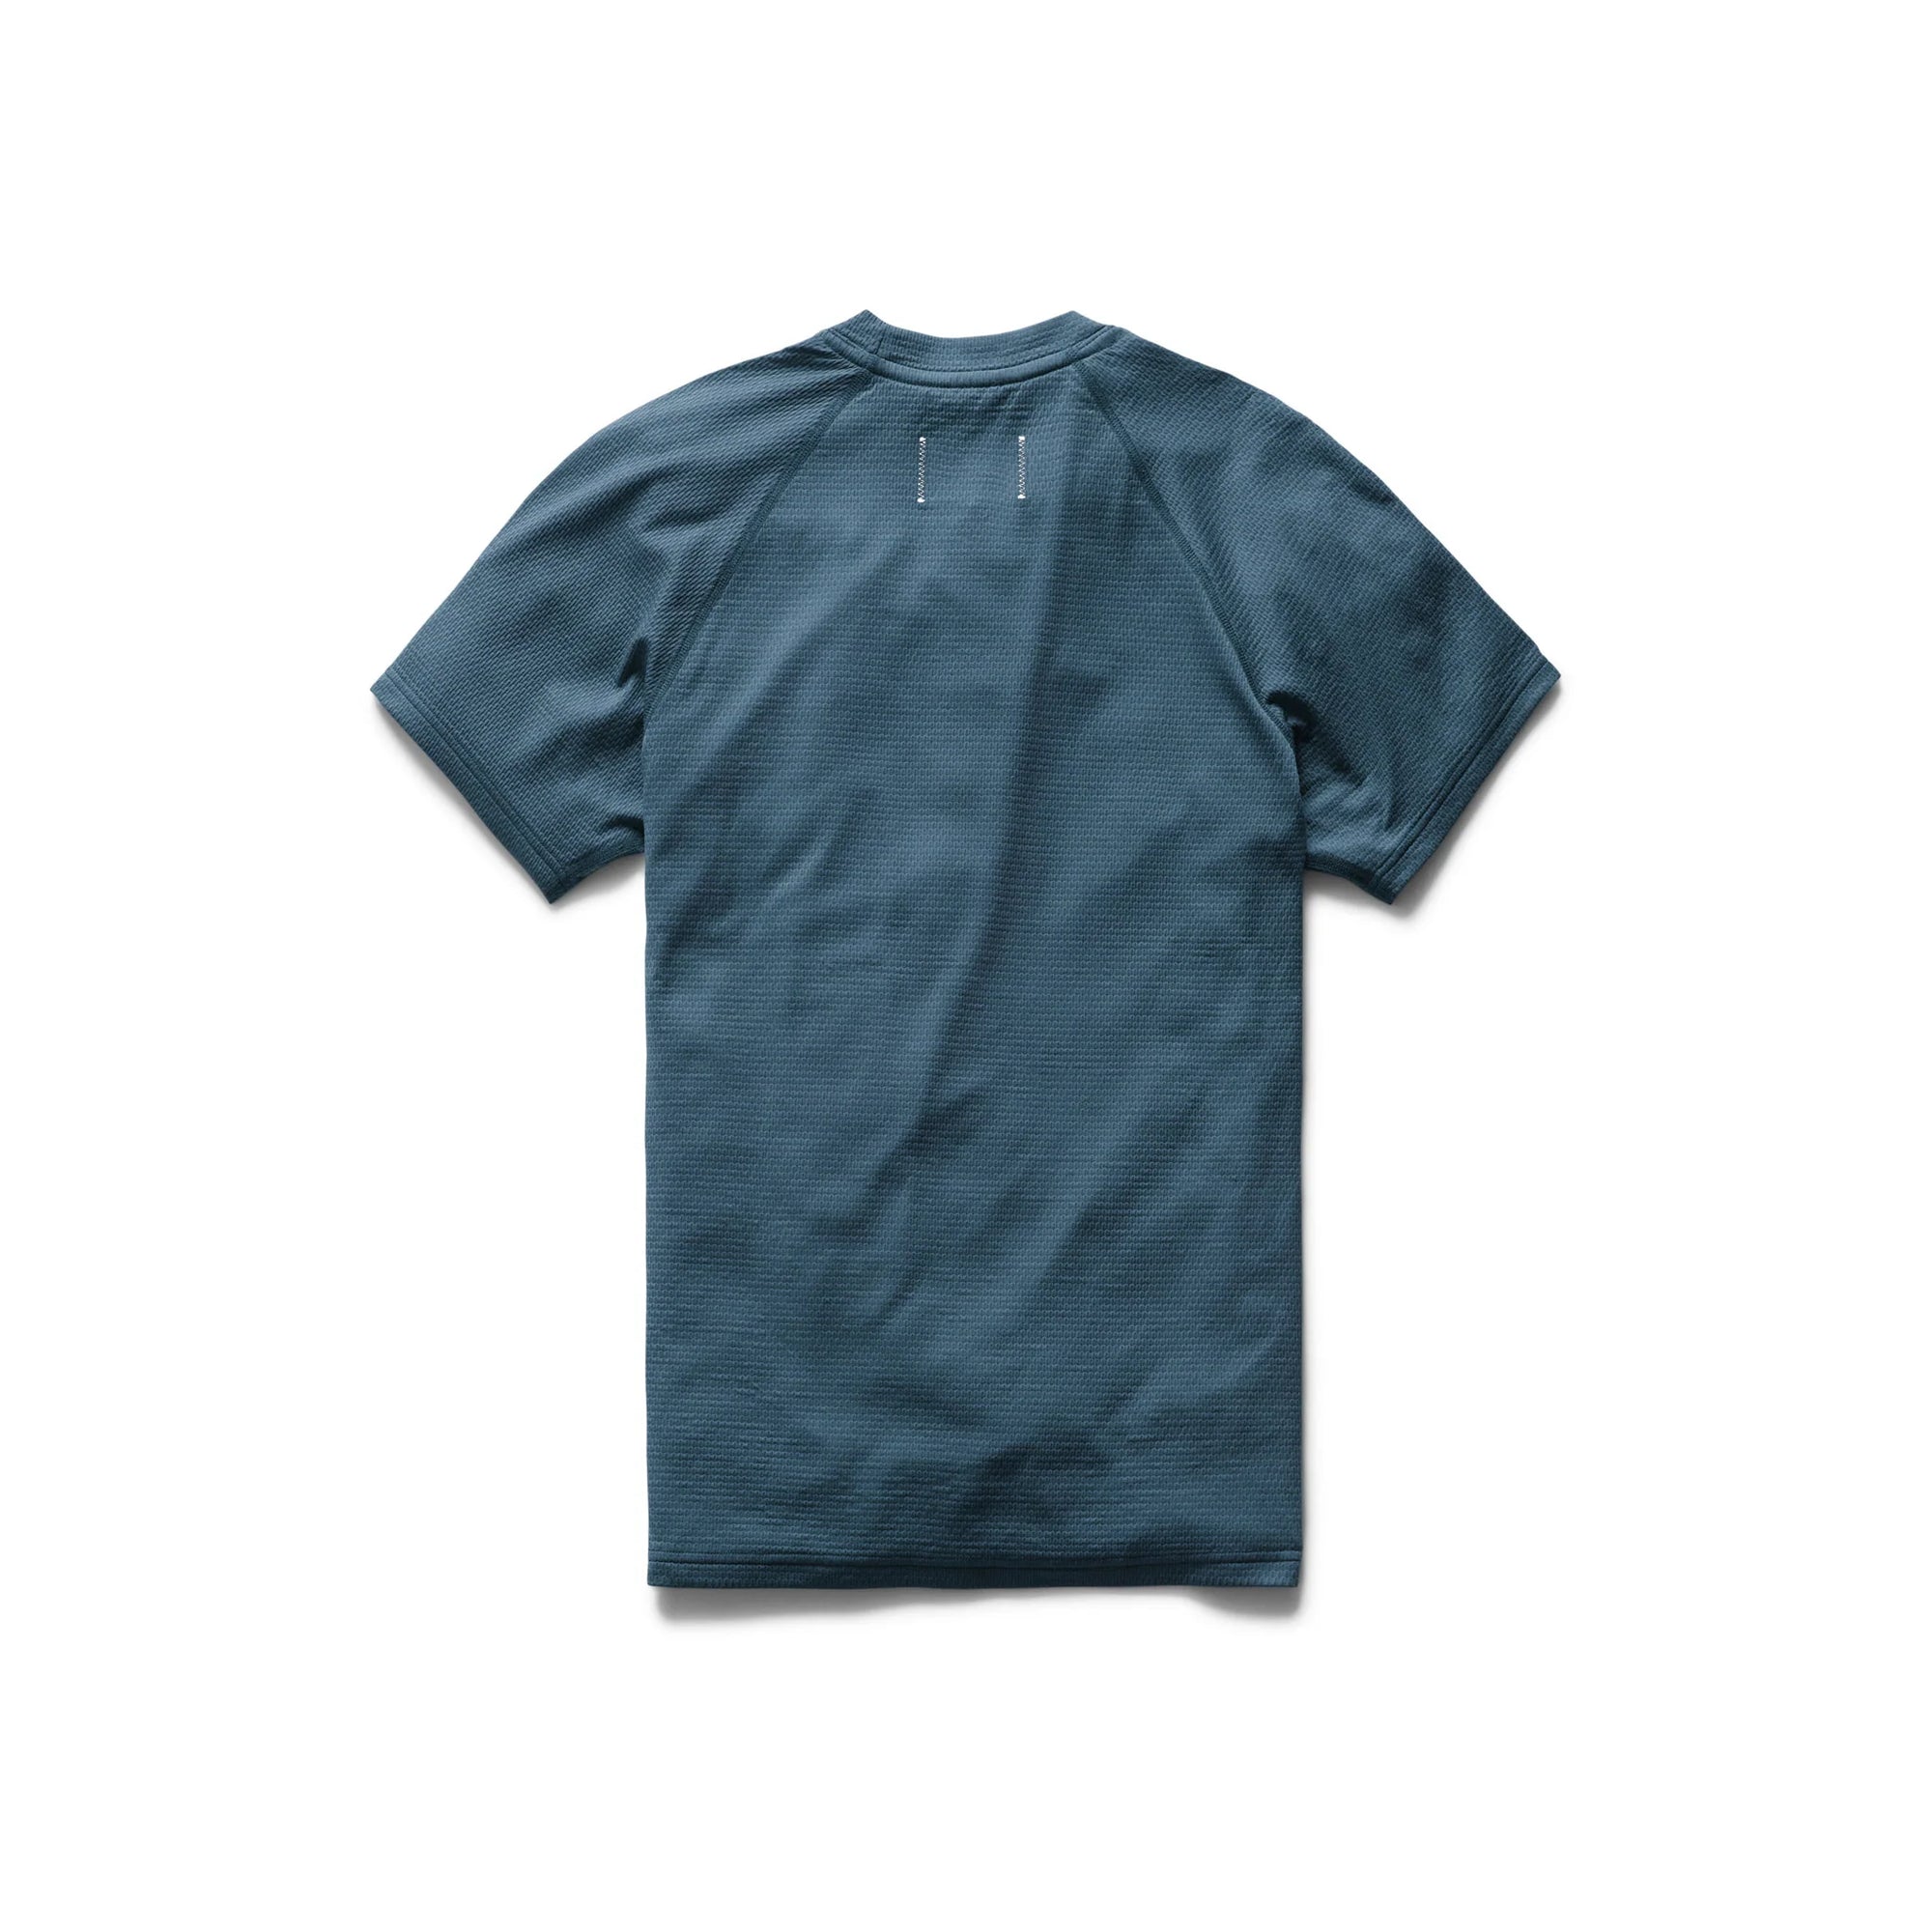 Reigning Champ Solotex Mesh T-Shirt in Washed Blue